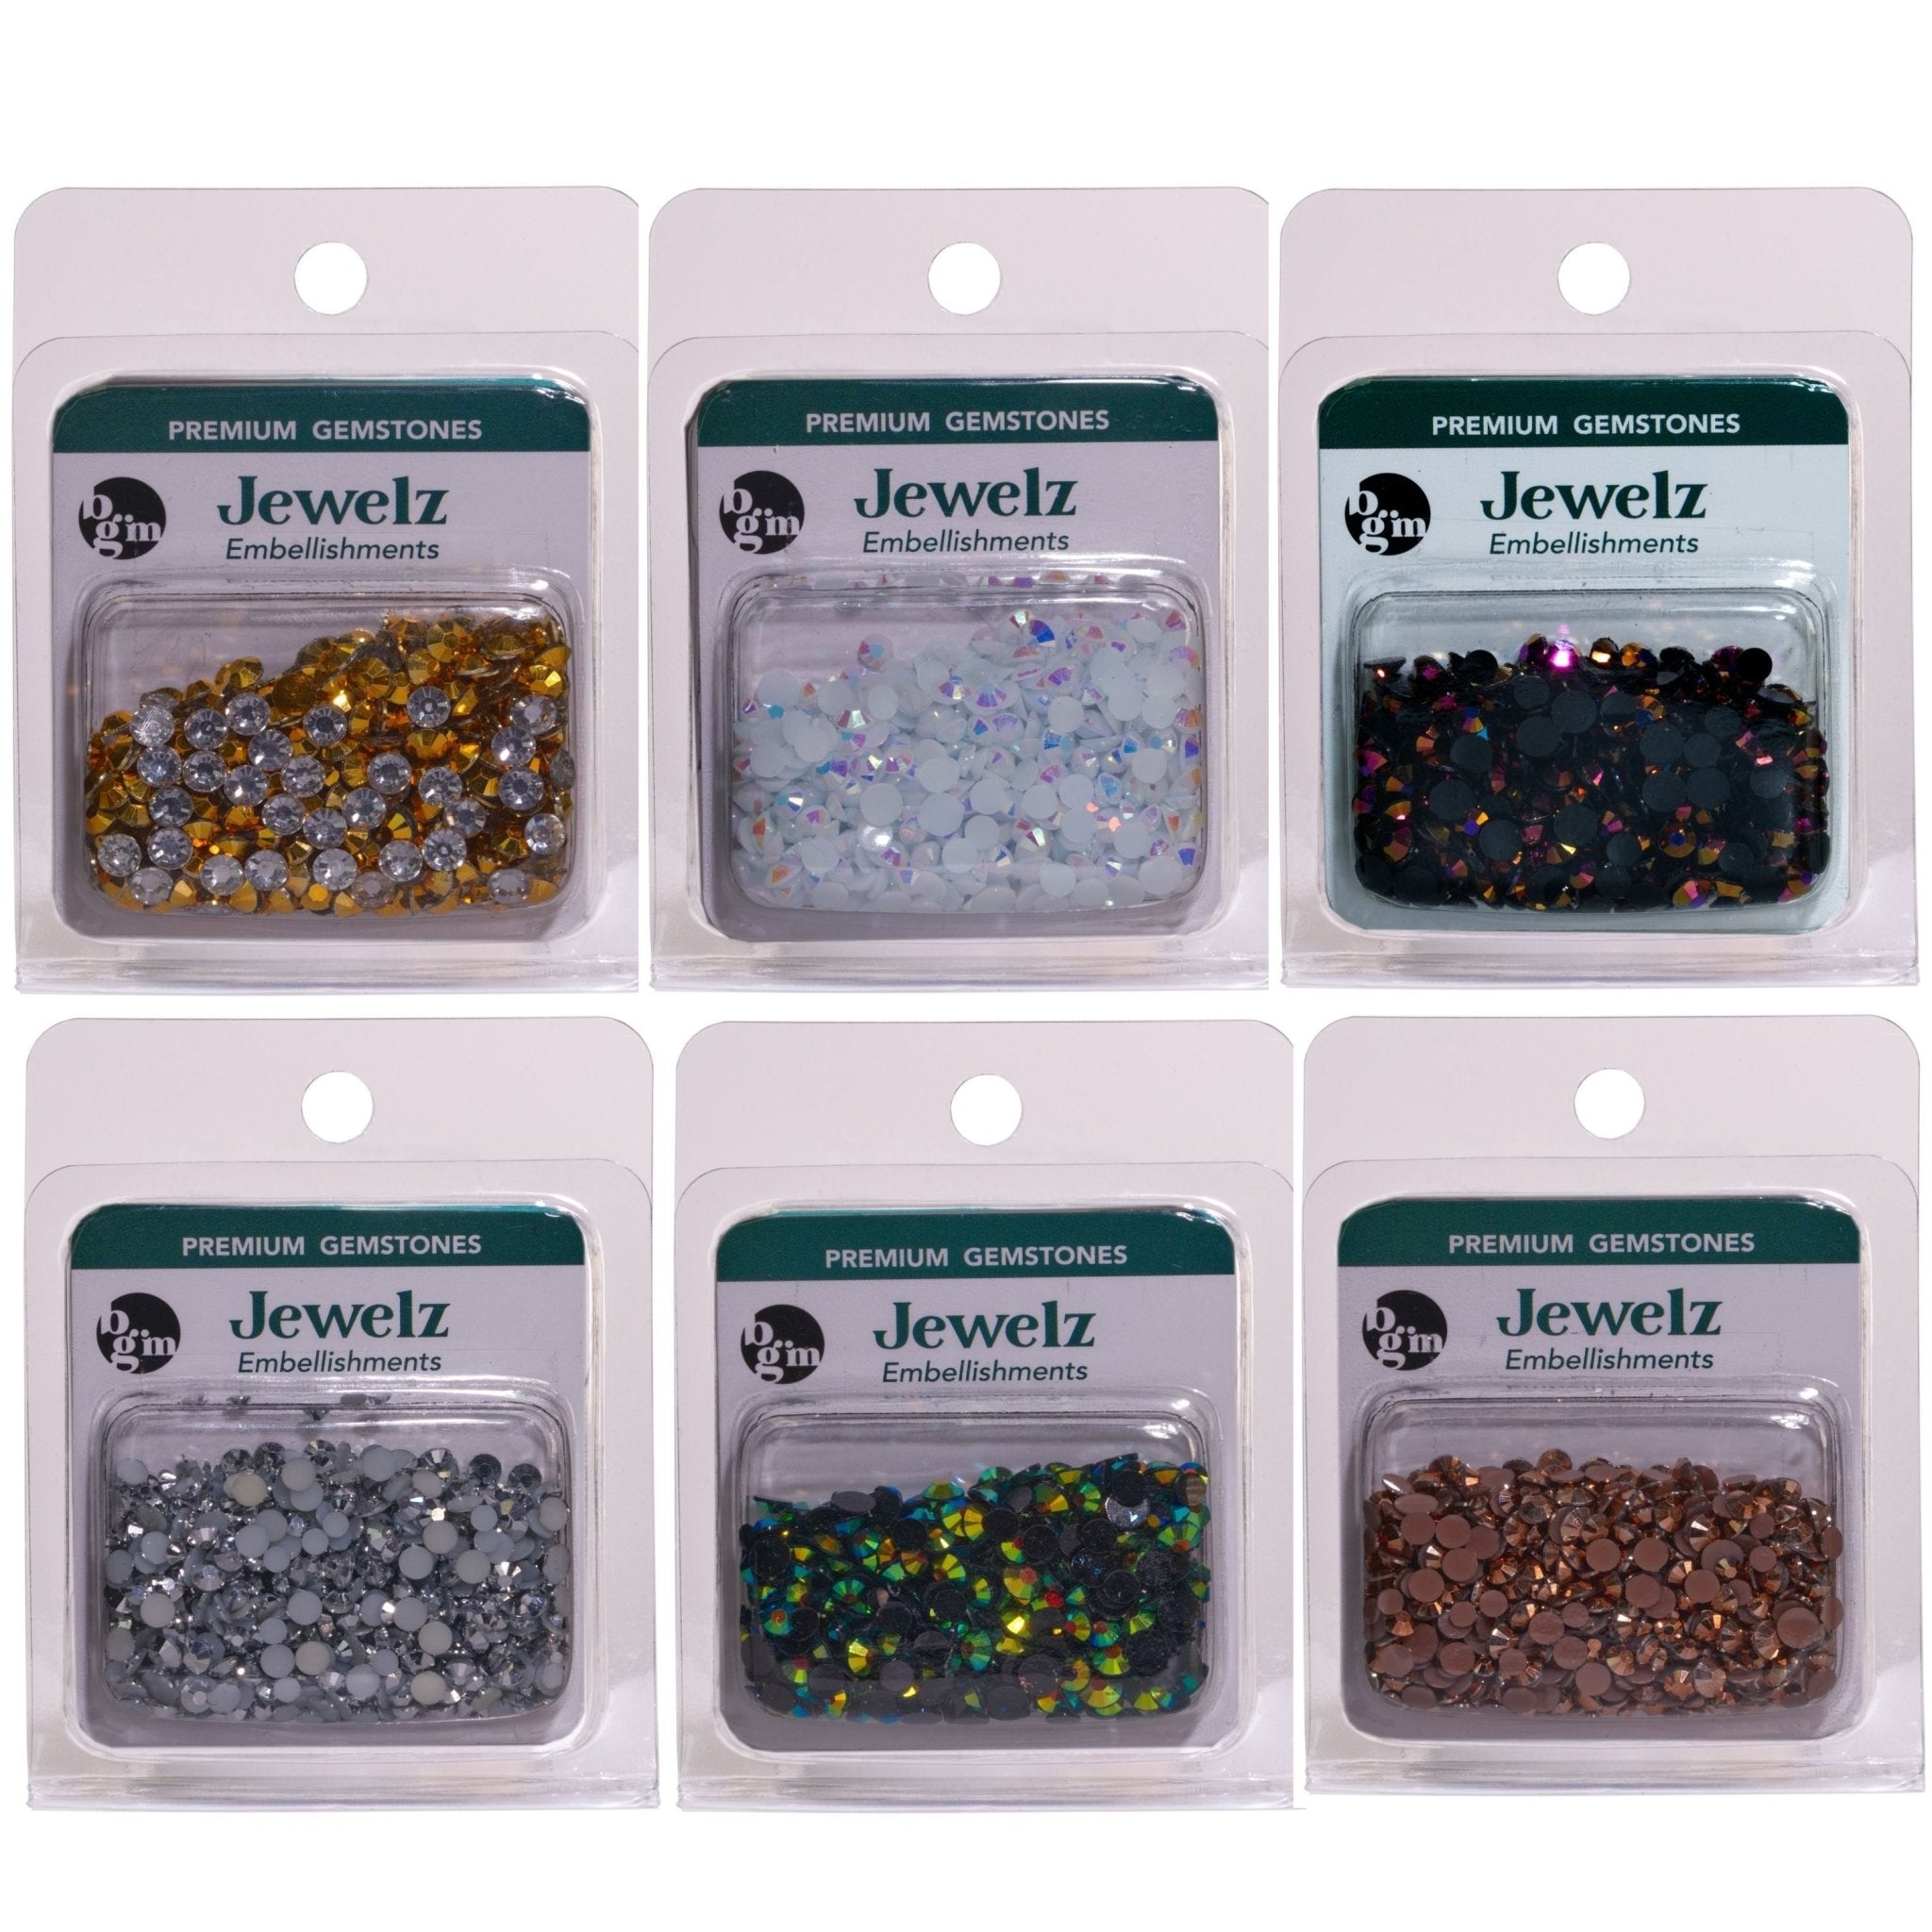 Golden Yellow Gems & Jewels for Crafts & Jewelry Making, Buttons Galore